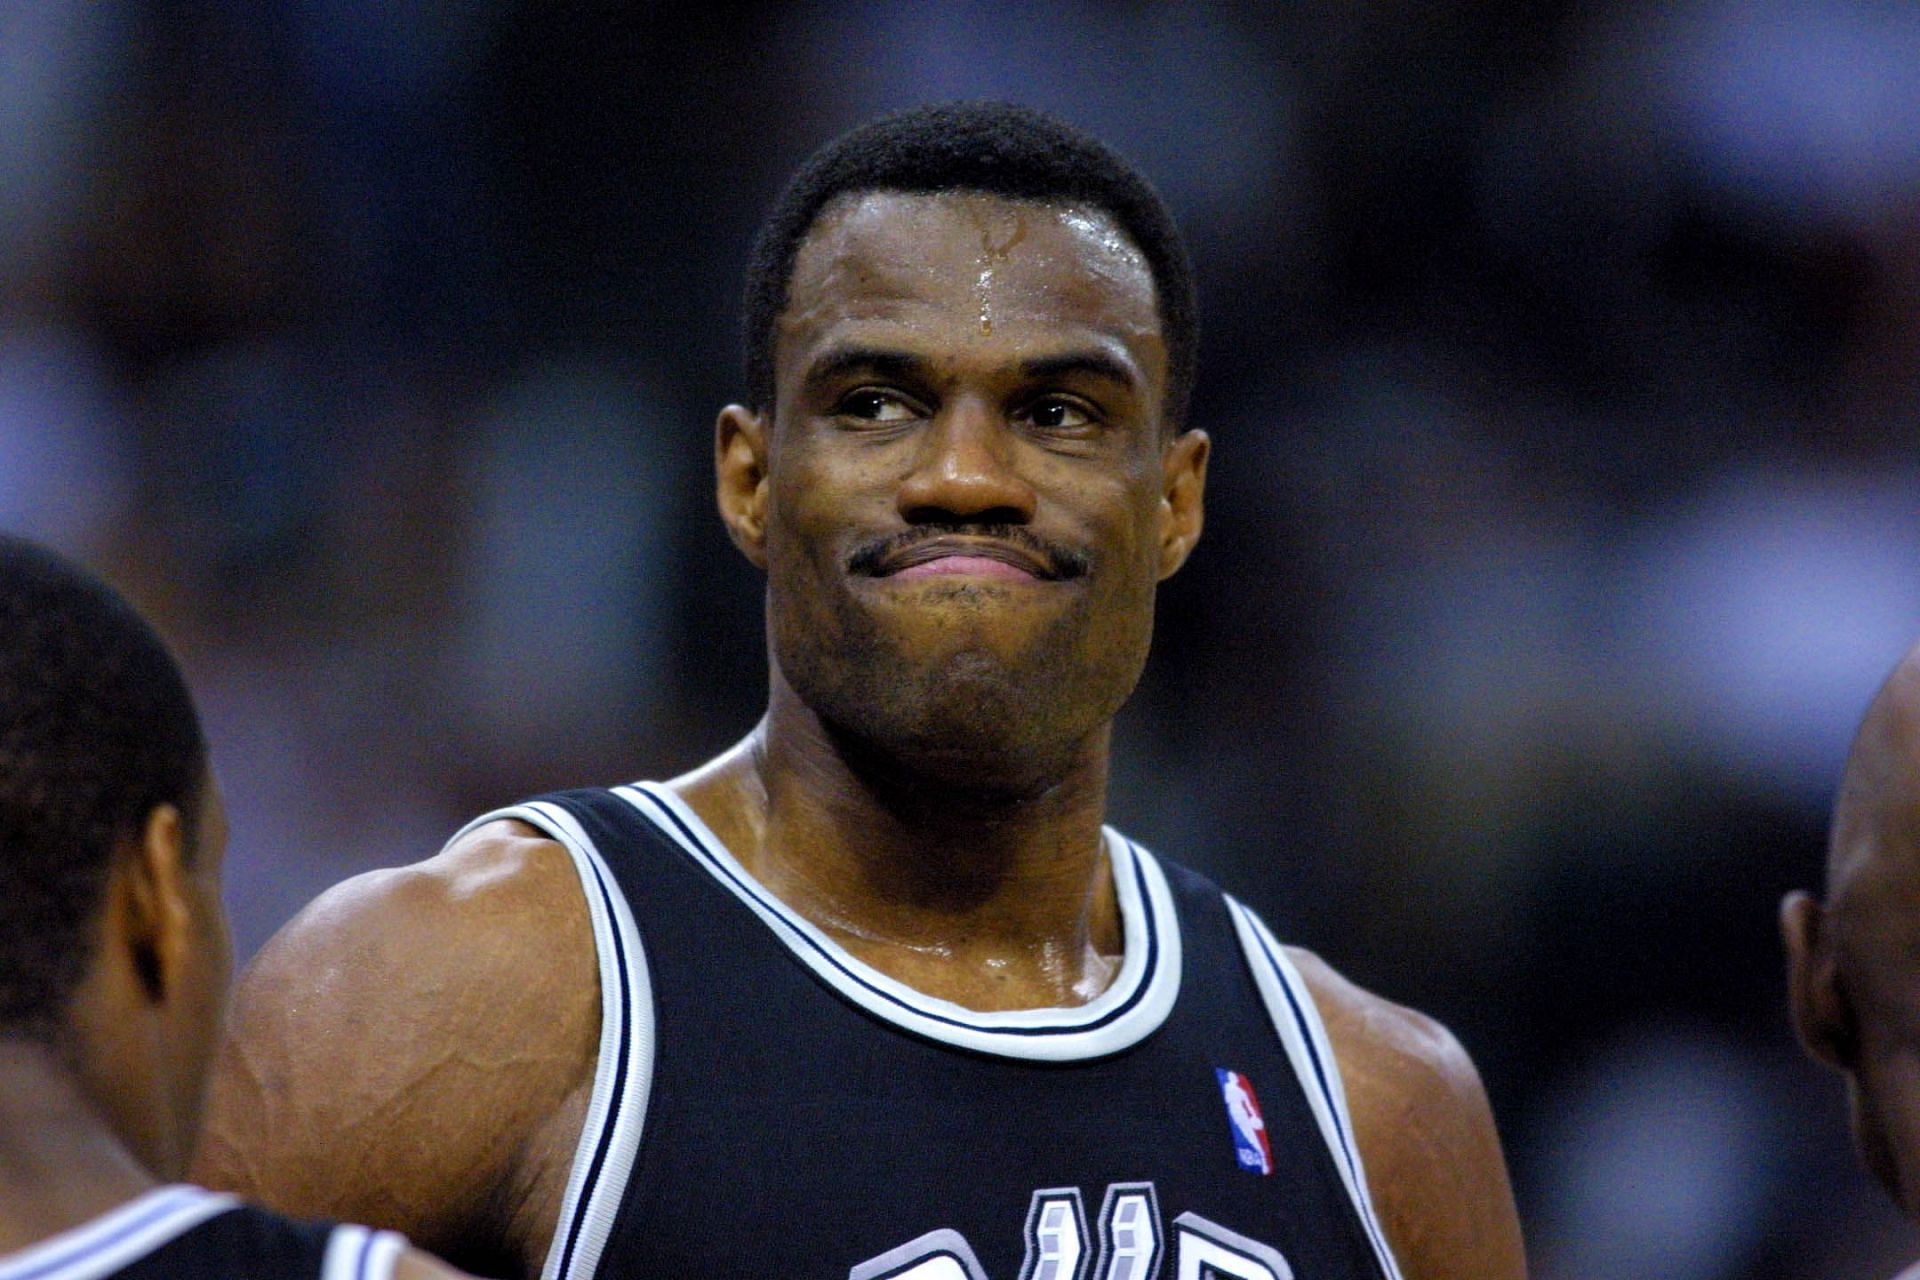 Junior Bridgeman and the NBA's richest players of all-time